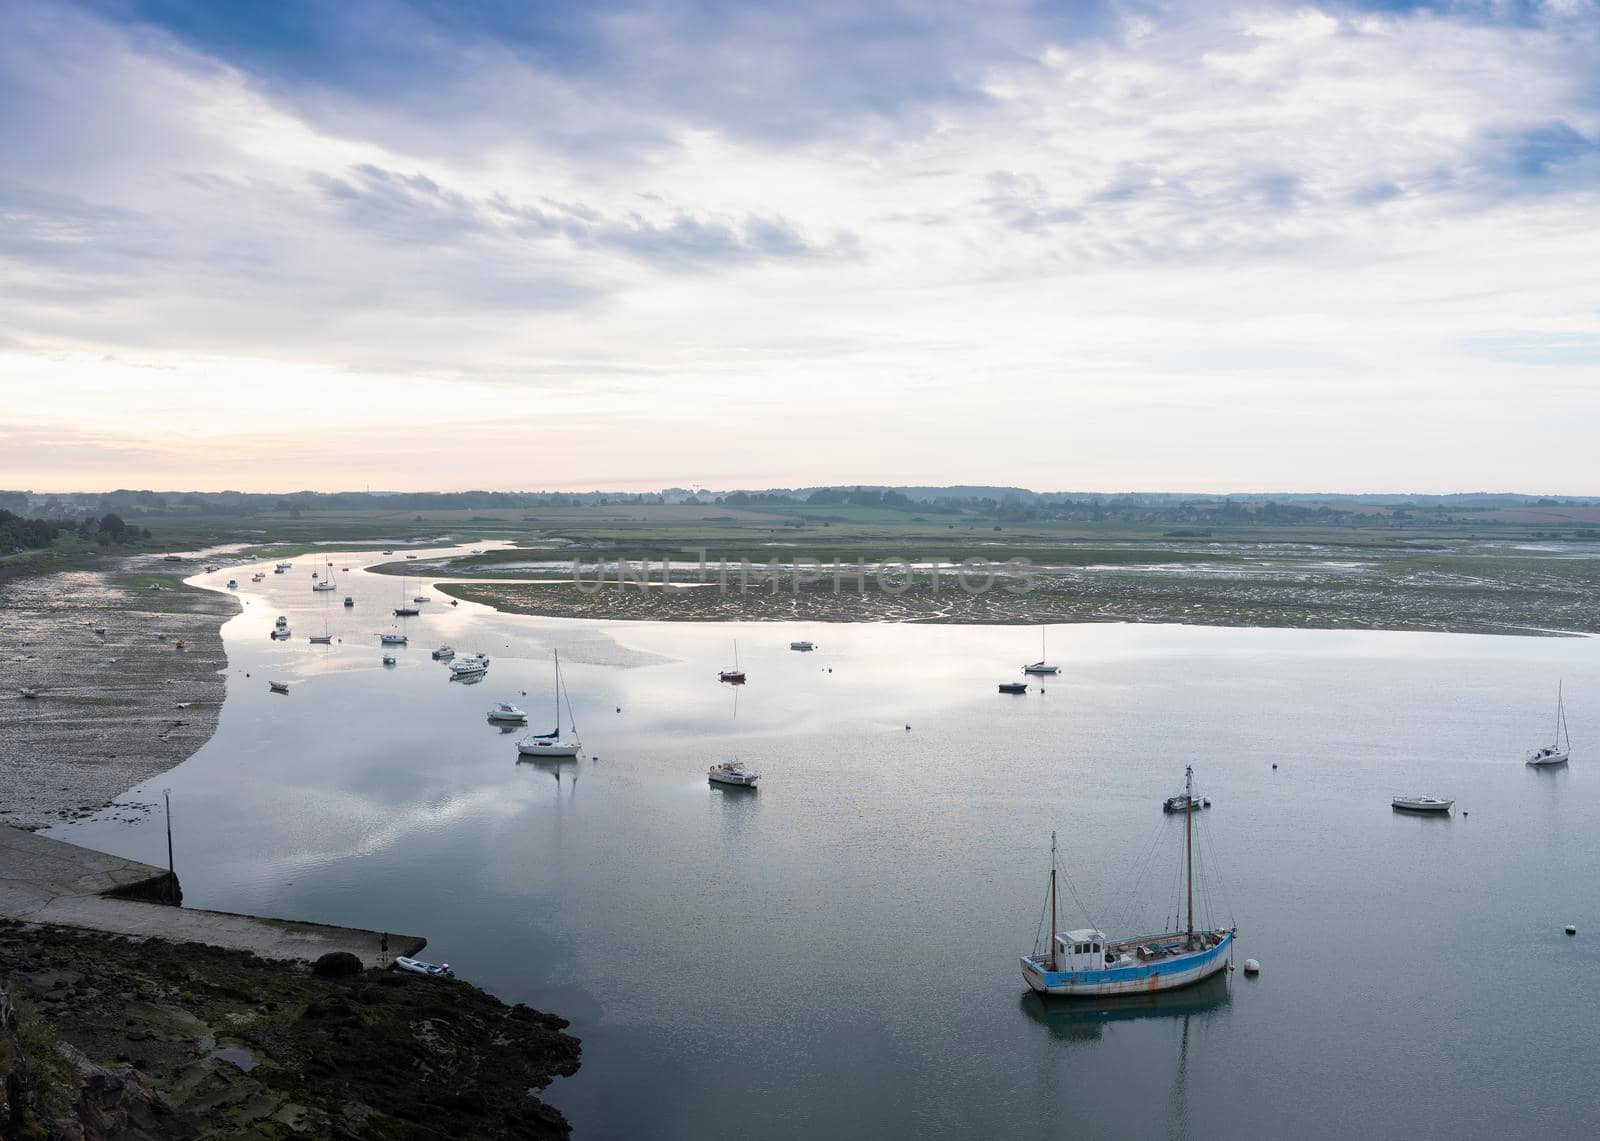 low tide and boats in river la rance in french region of brittany at sunrise in summer